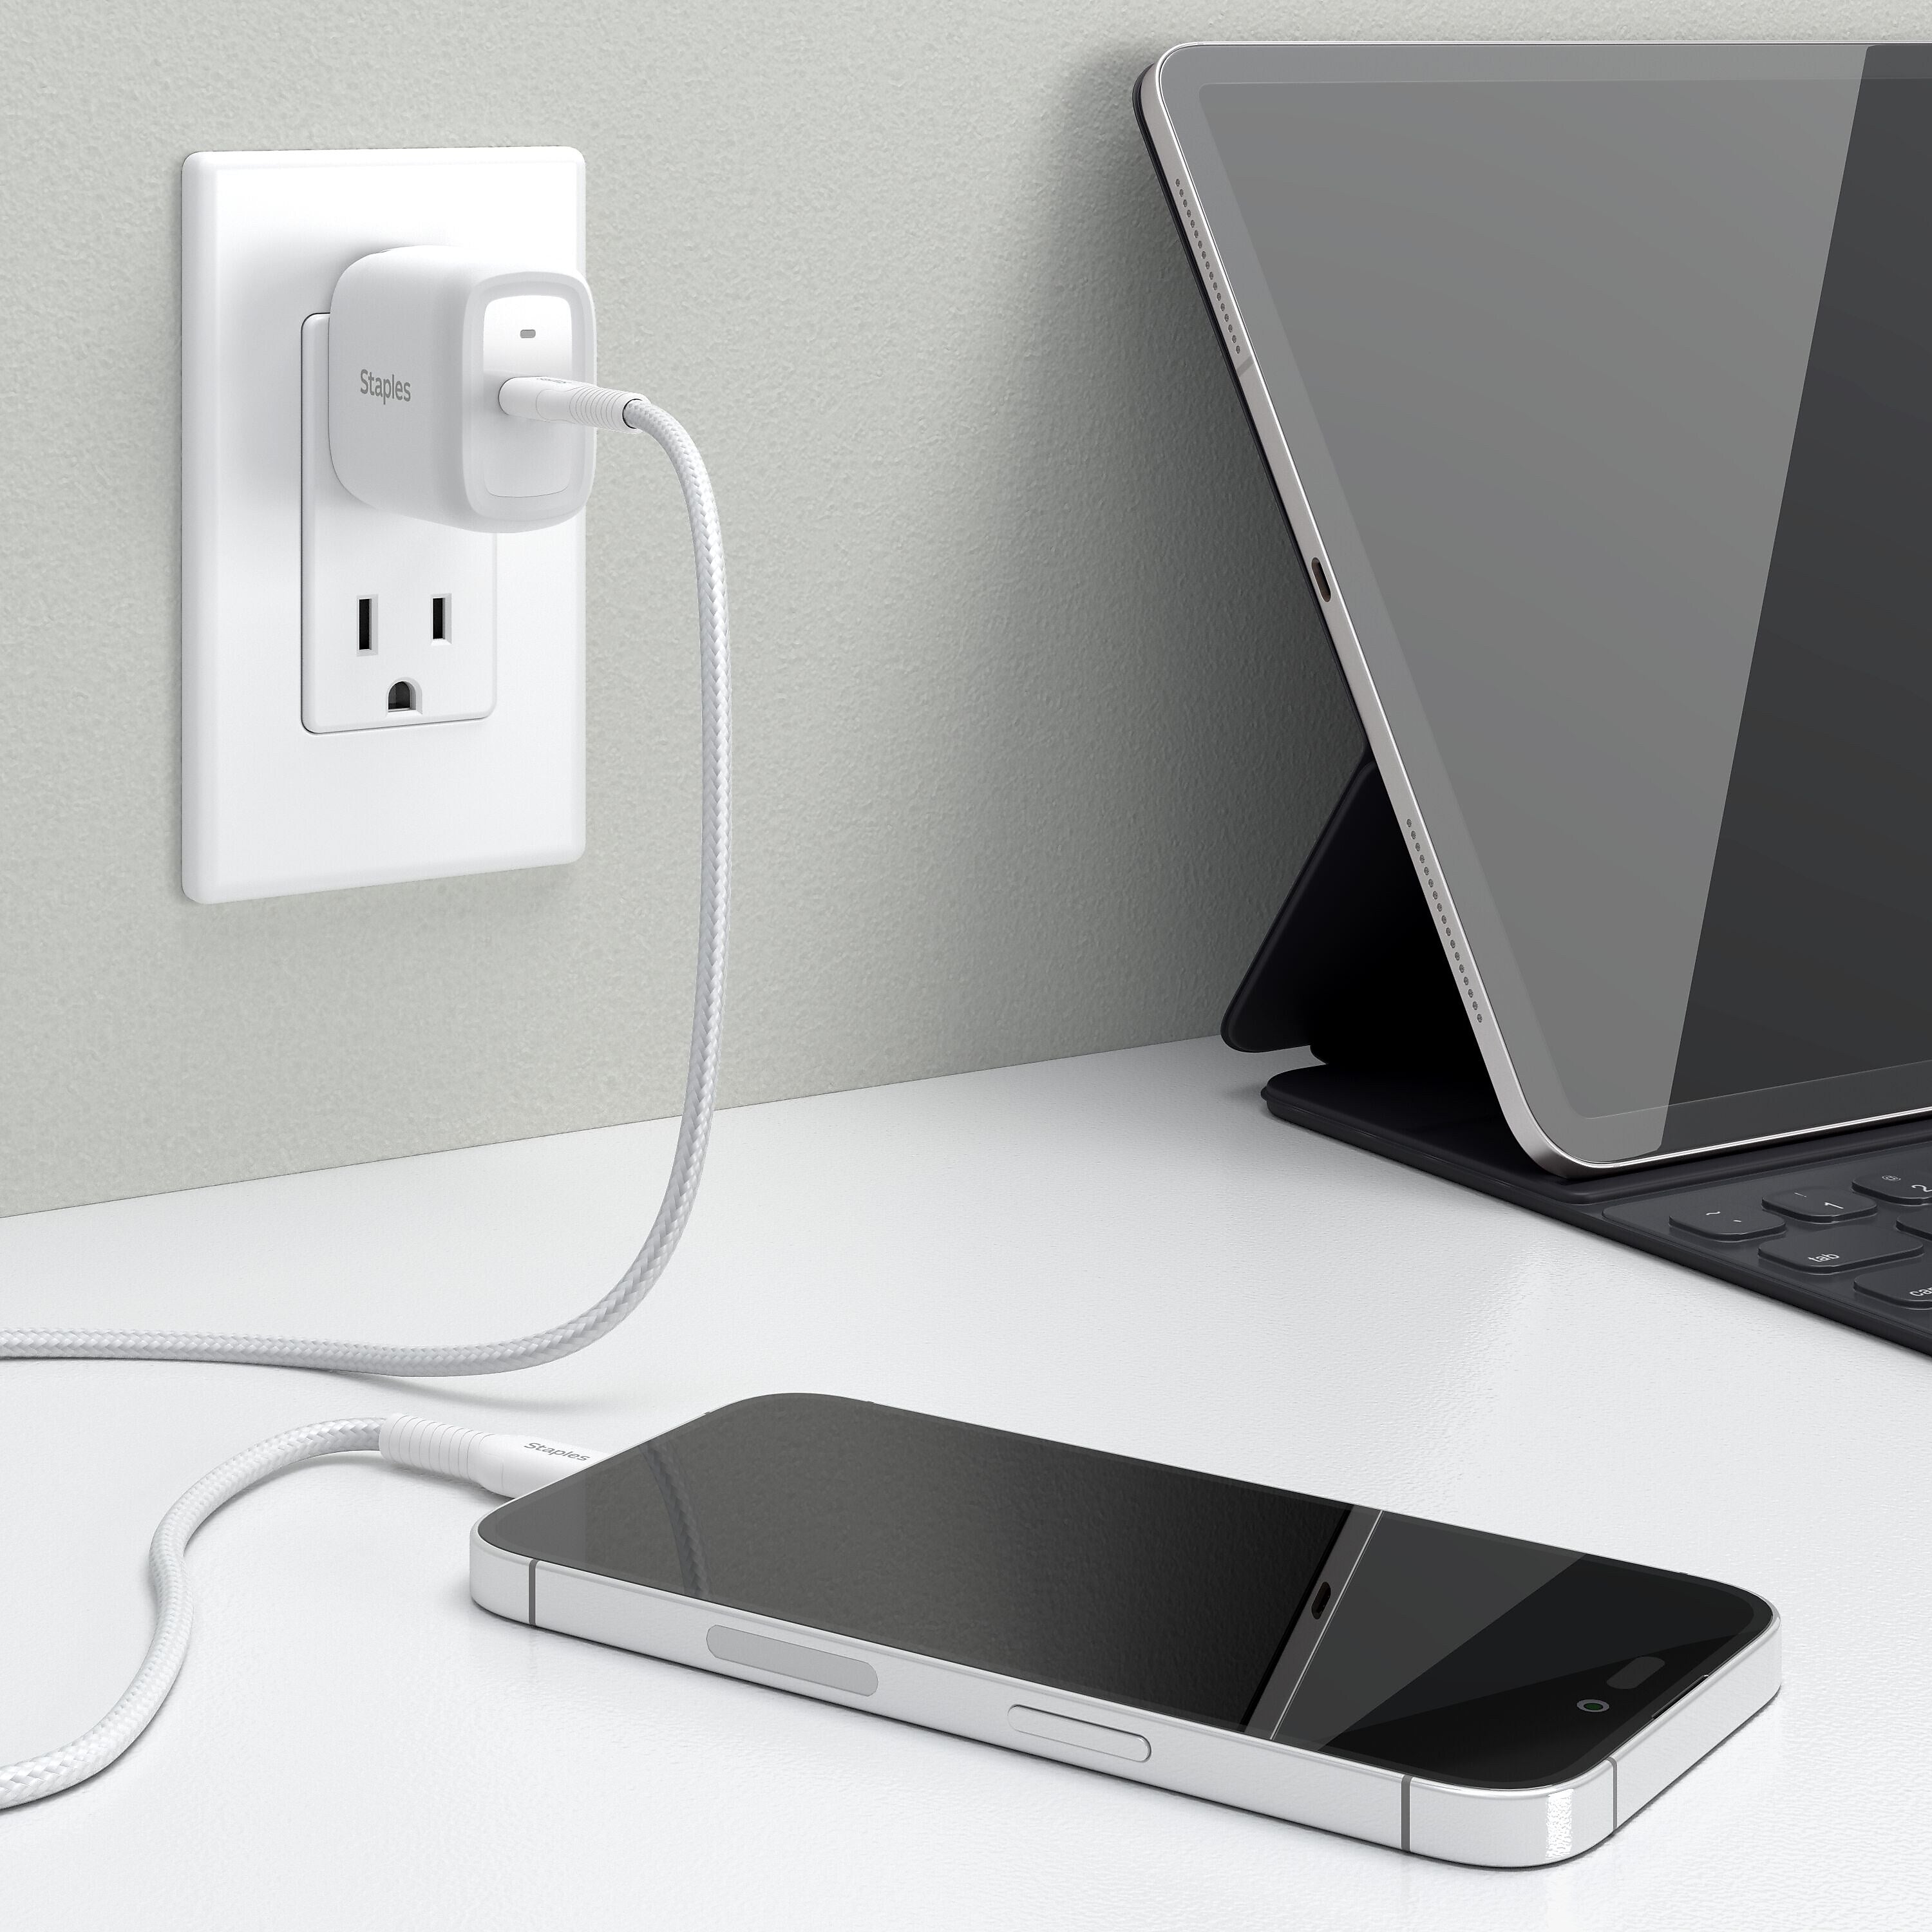 Staples® USB-C Wall Charger, White